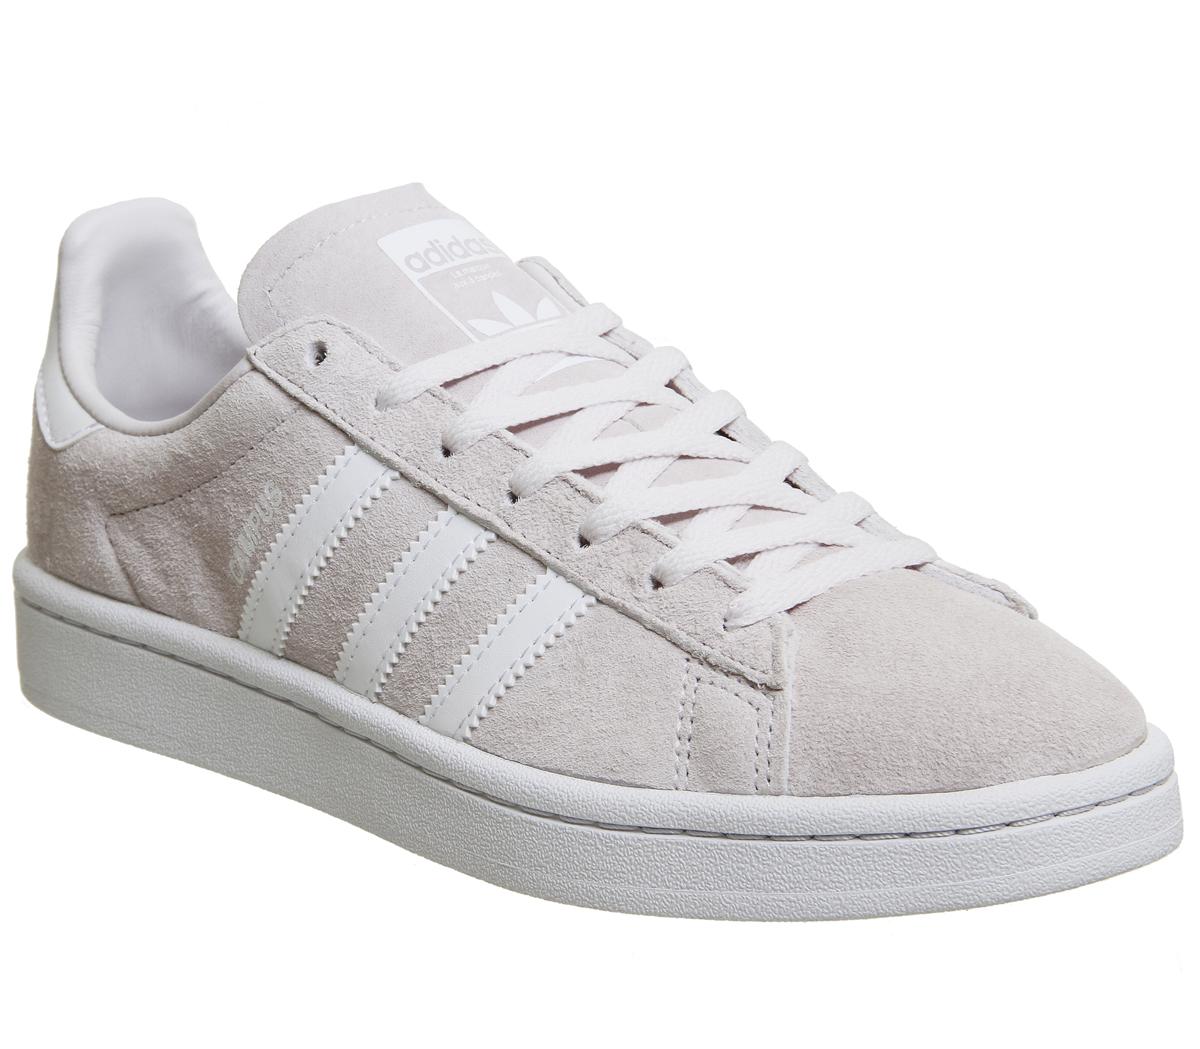 adidas Campus Trainers Orchid Tint - Hers trainers